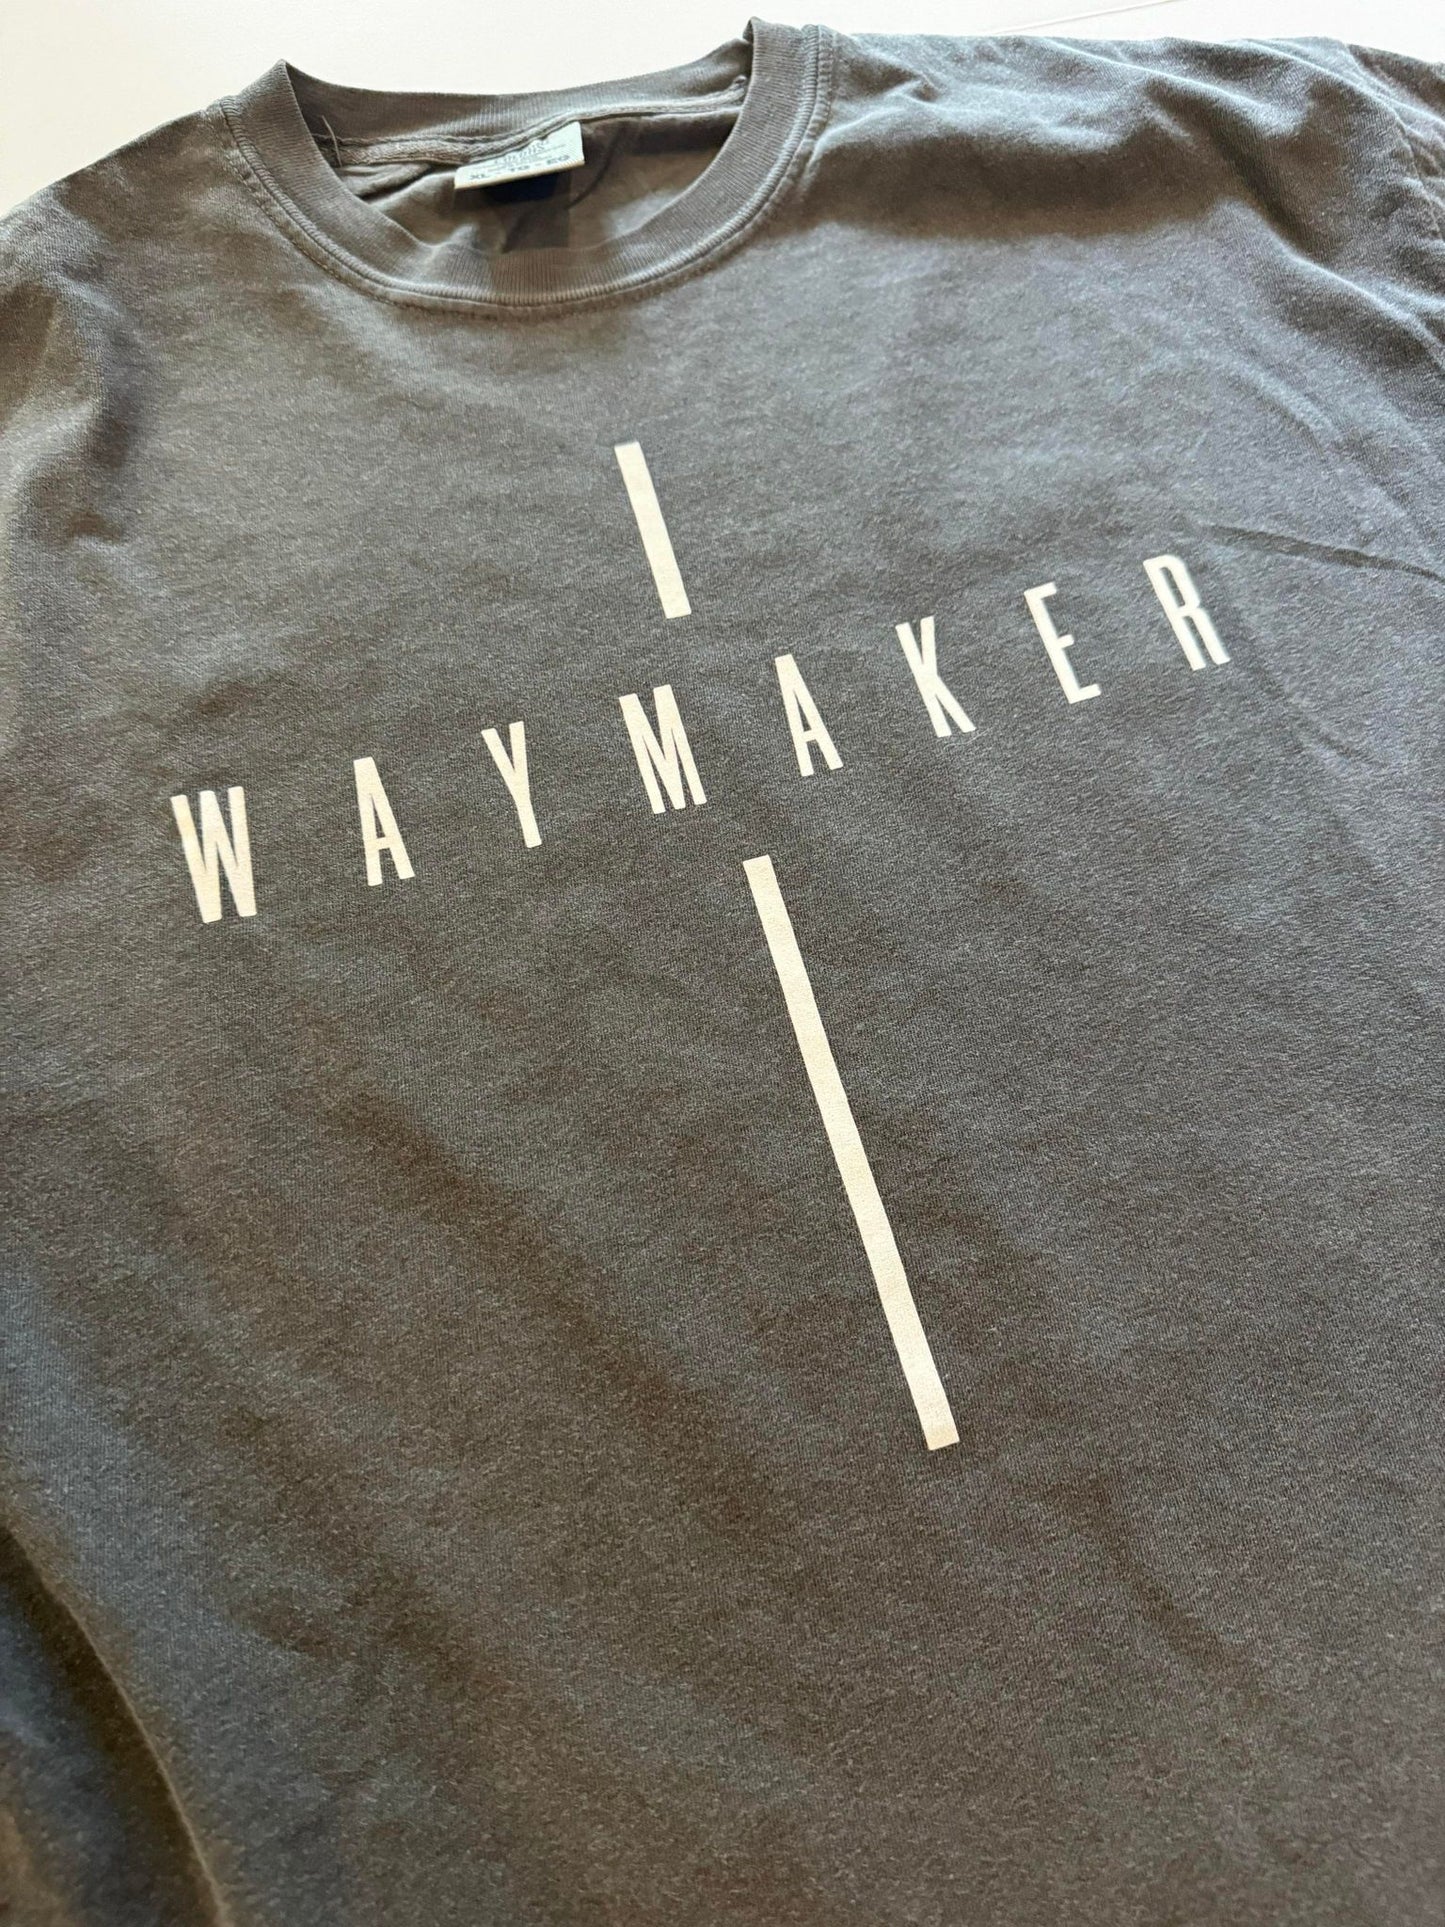 Waymaker Graphic Tee *Limited Lauch*